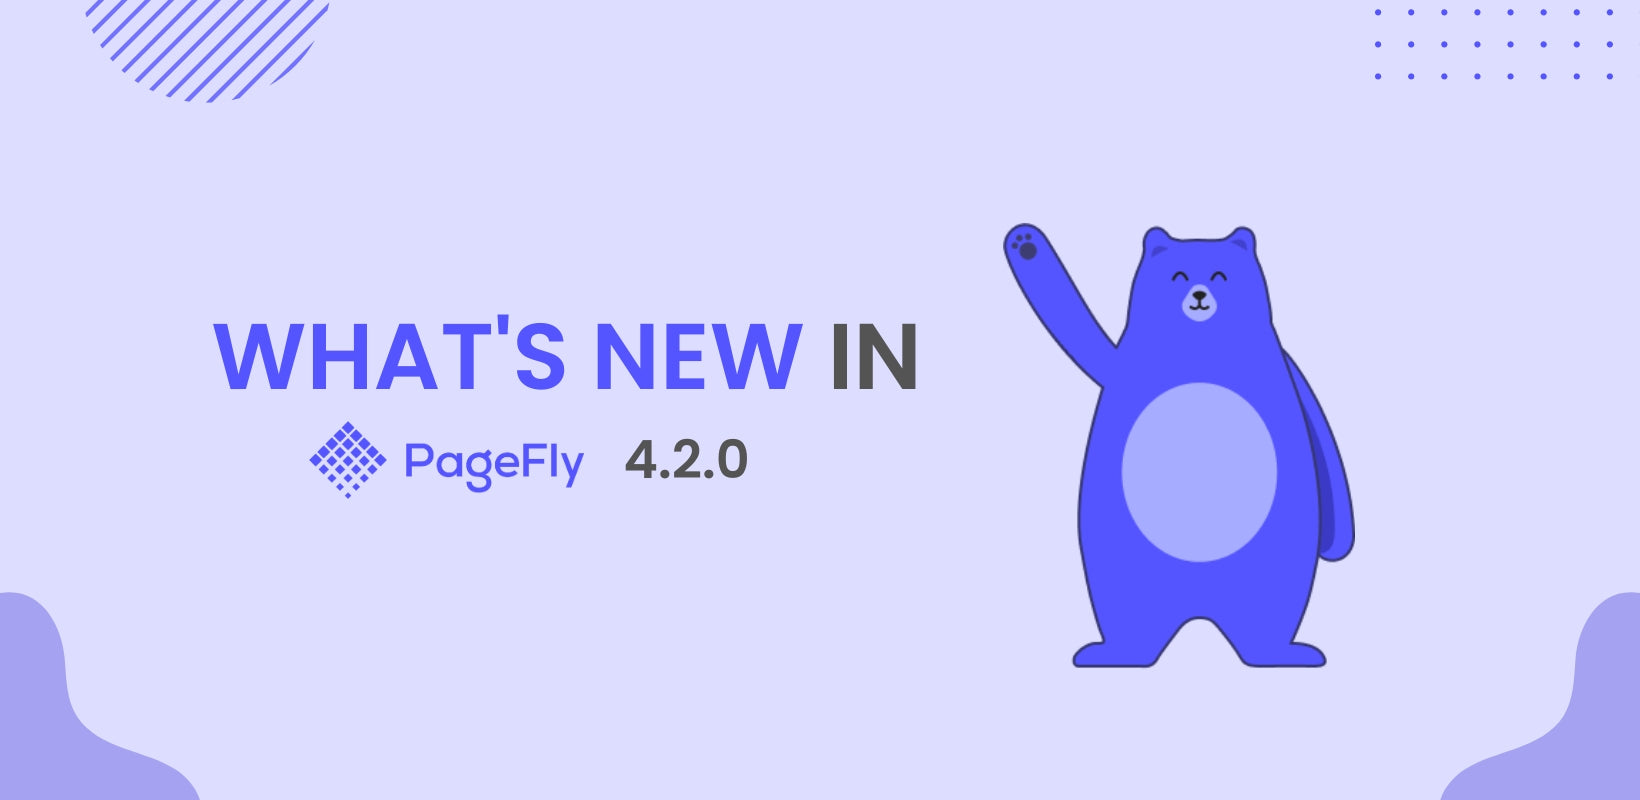 PageFly 4.2.0: Level Up with Multiple New Features Through Diverse Third-Party Integrations